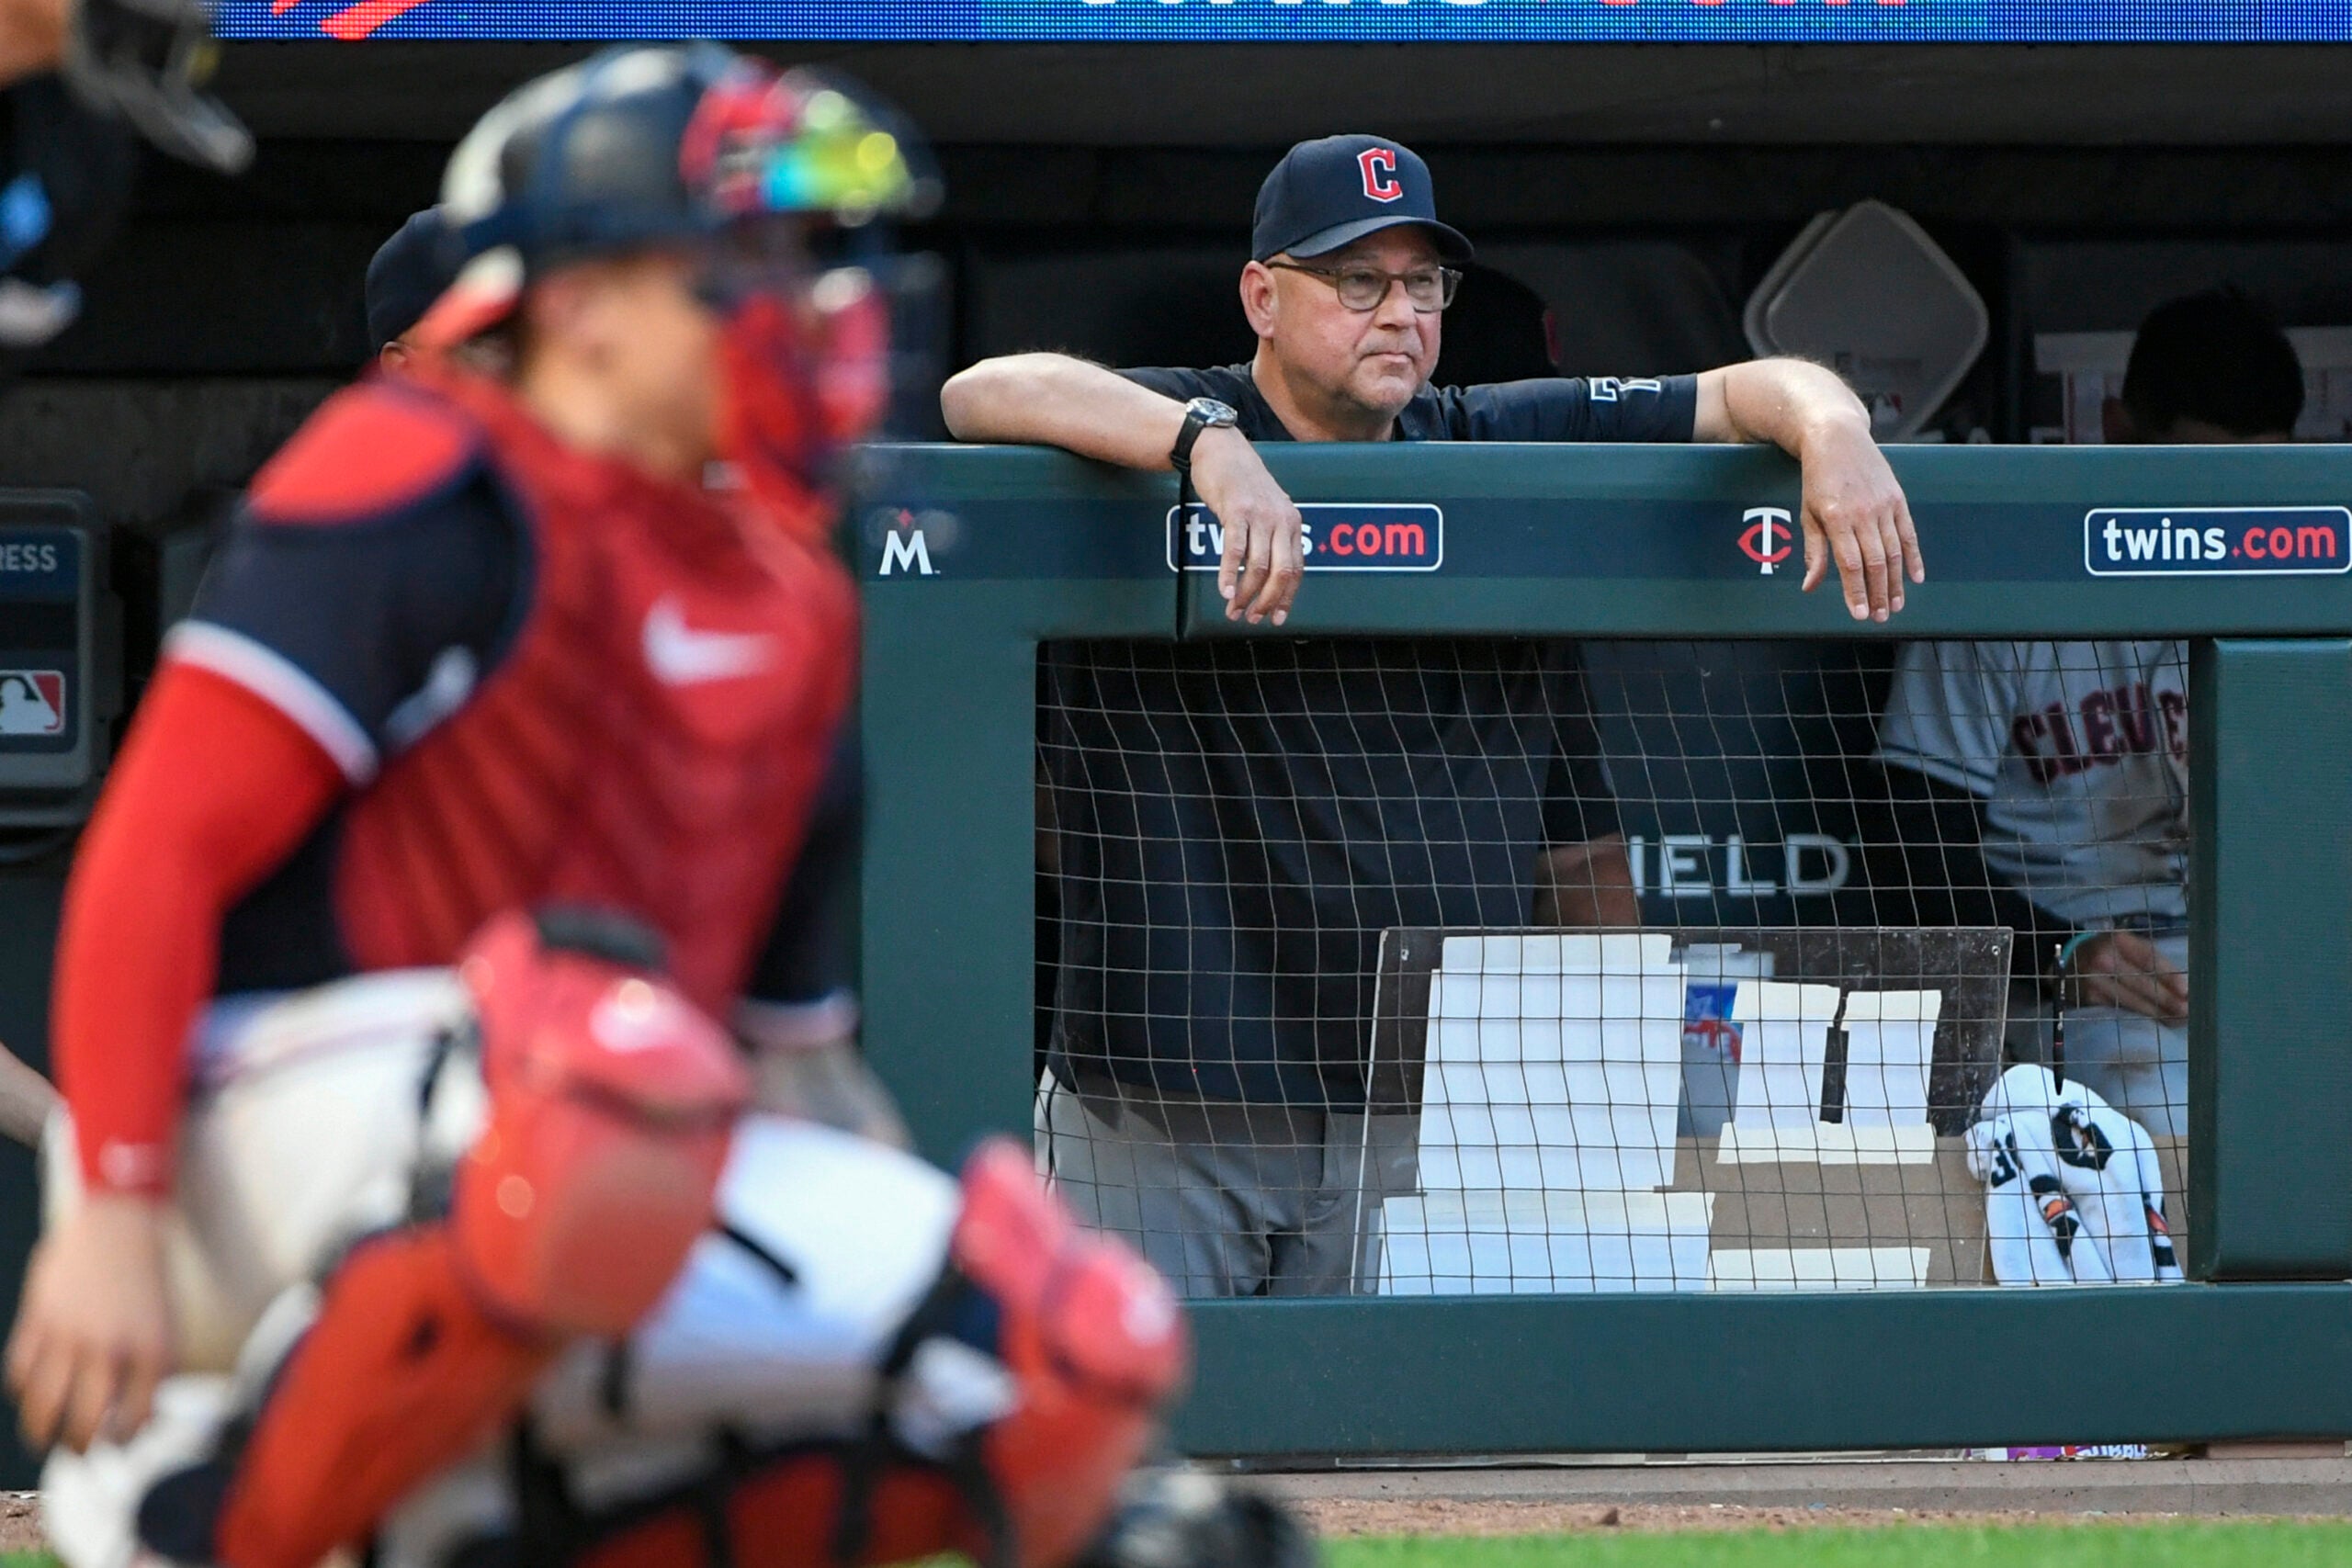 Cleveland Guardians manager Terry Francona, right, watches a baseball game against the Minnesota Twins.